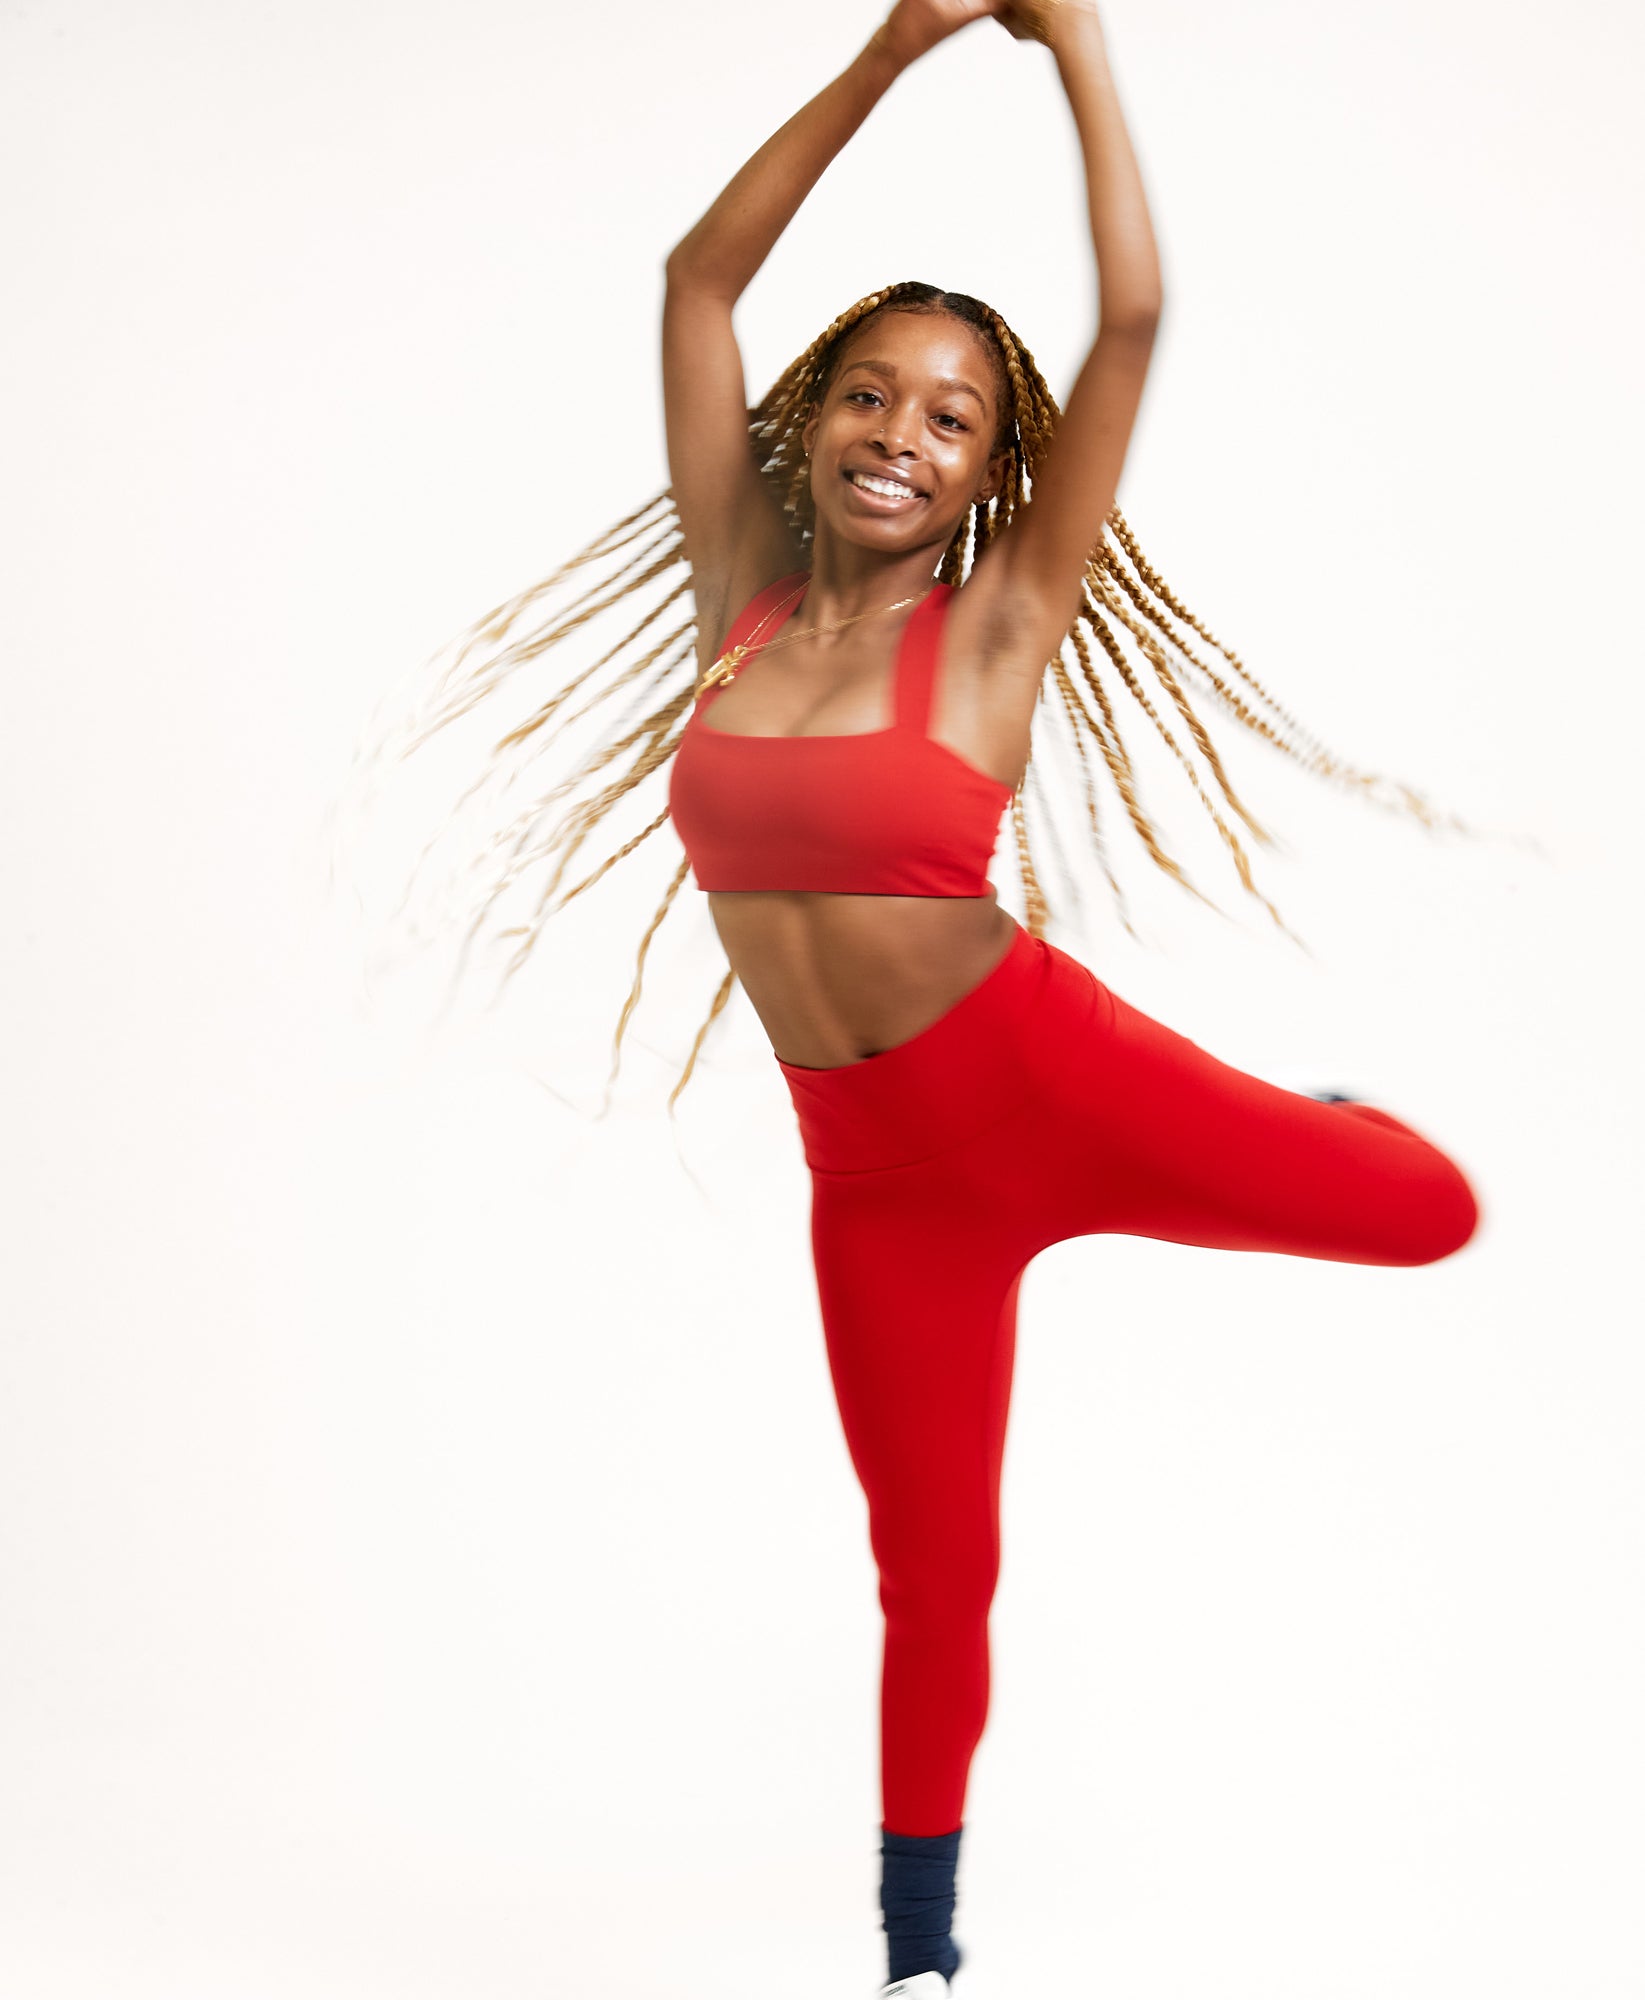 Wear One's At Routine Legging in Casanova Red on Model with Leg Up Stretching